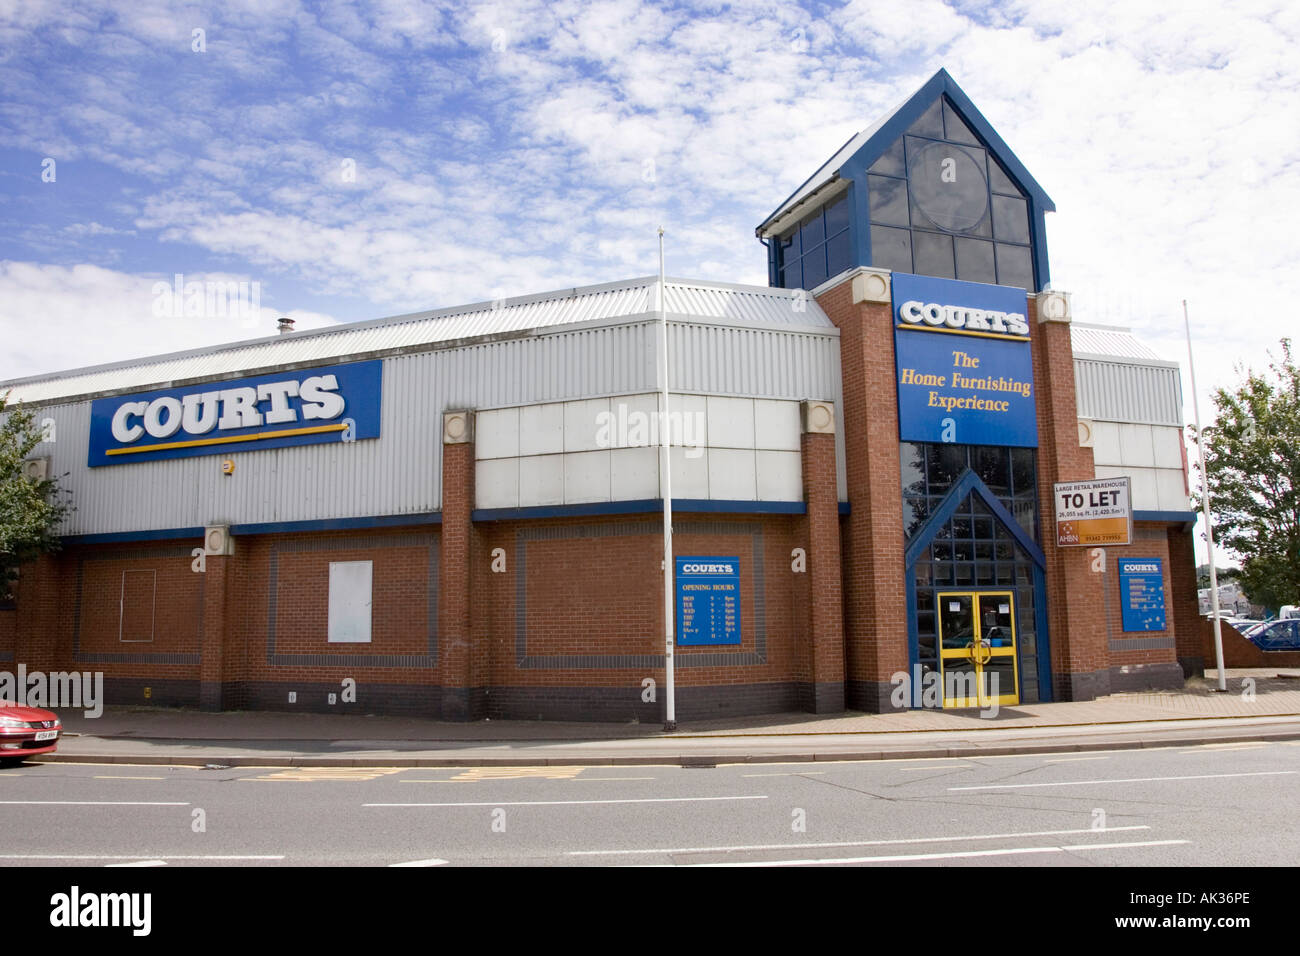 Courts furniture store in Worcester, UK Stock Photo: 8497133 - Alamy